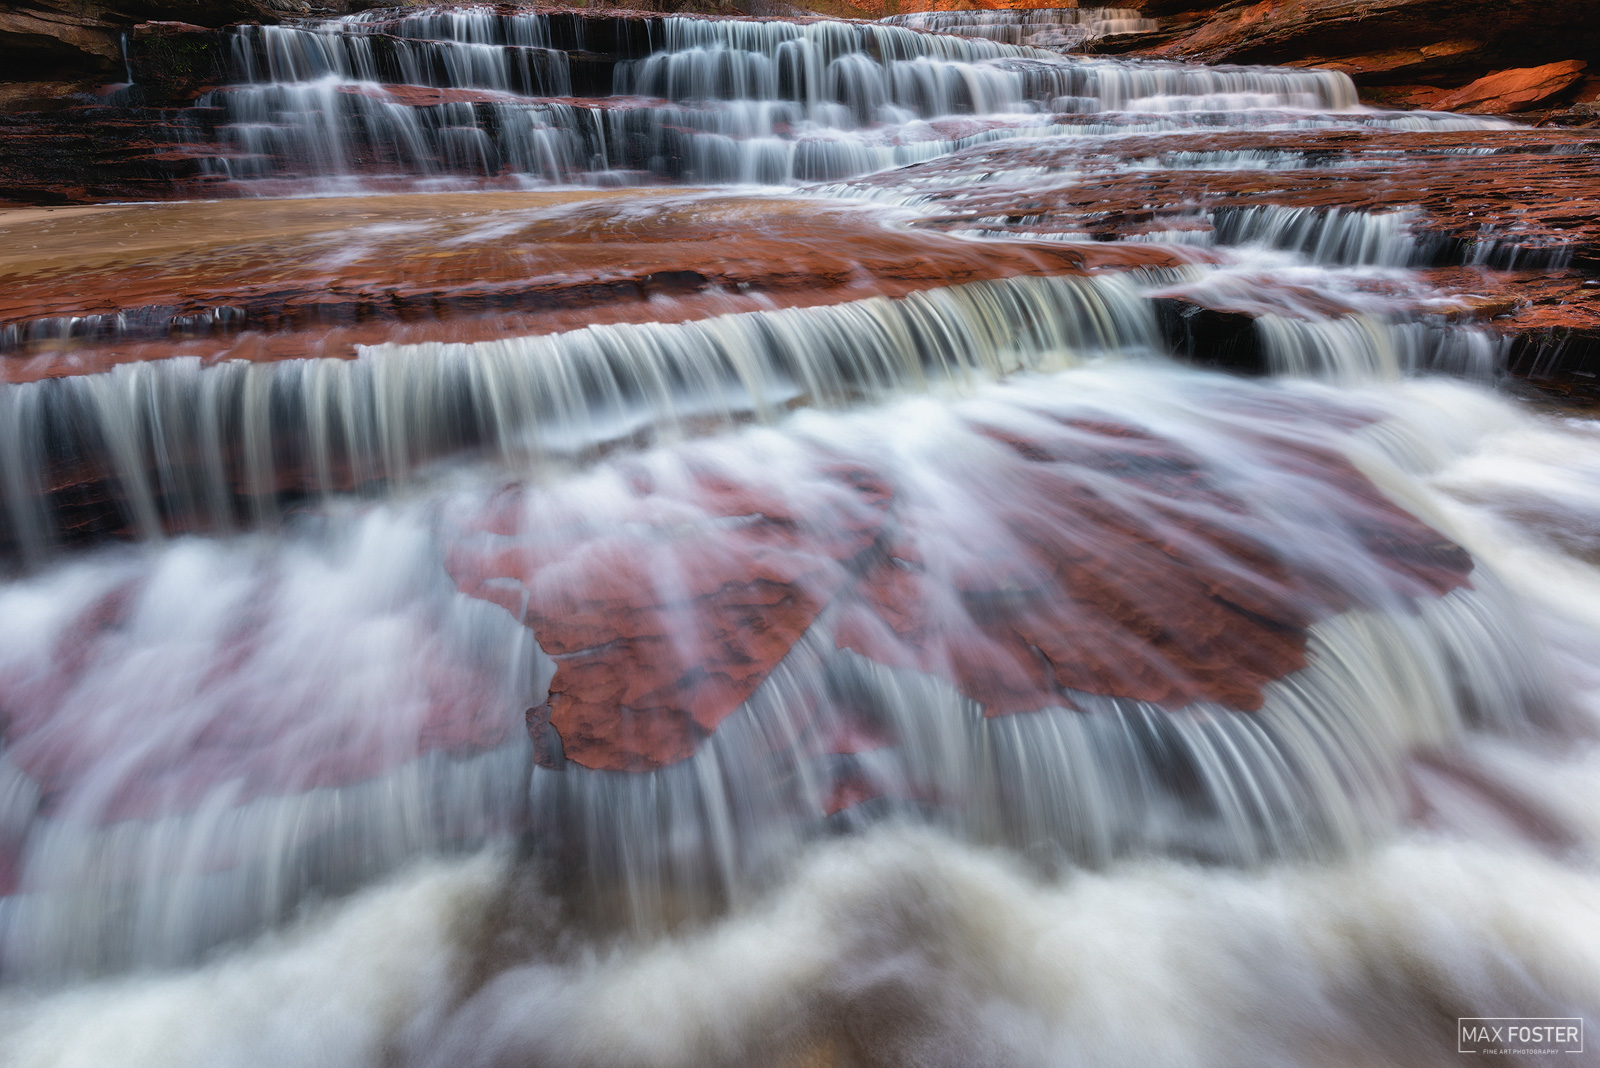 Breathe new life into your home with Cascade Symphony, Max Foster's limited edition photography print of Archangel Falls in Zion...